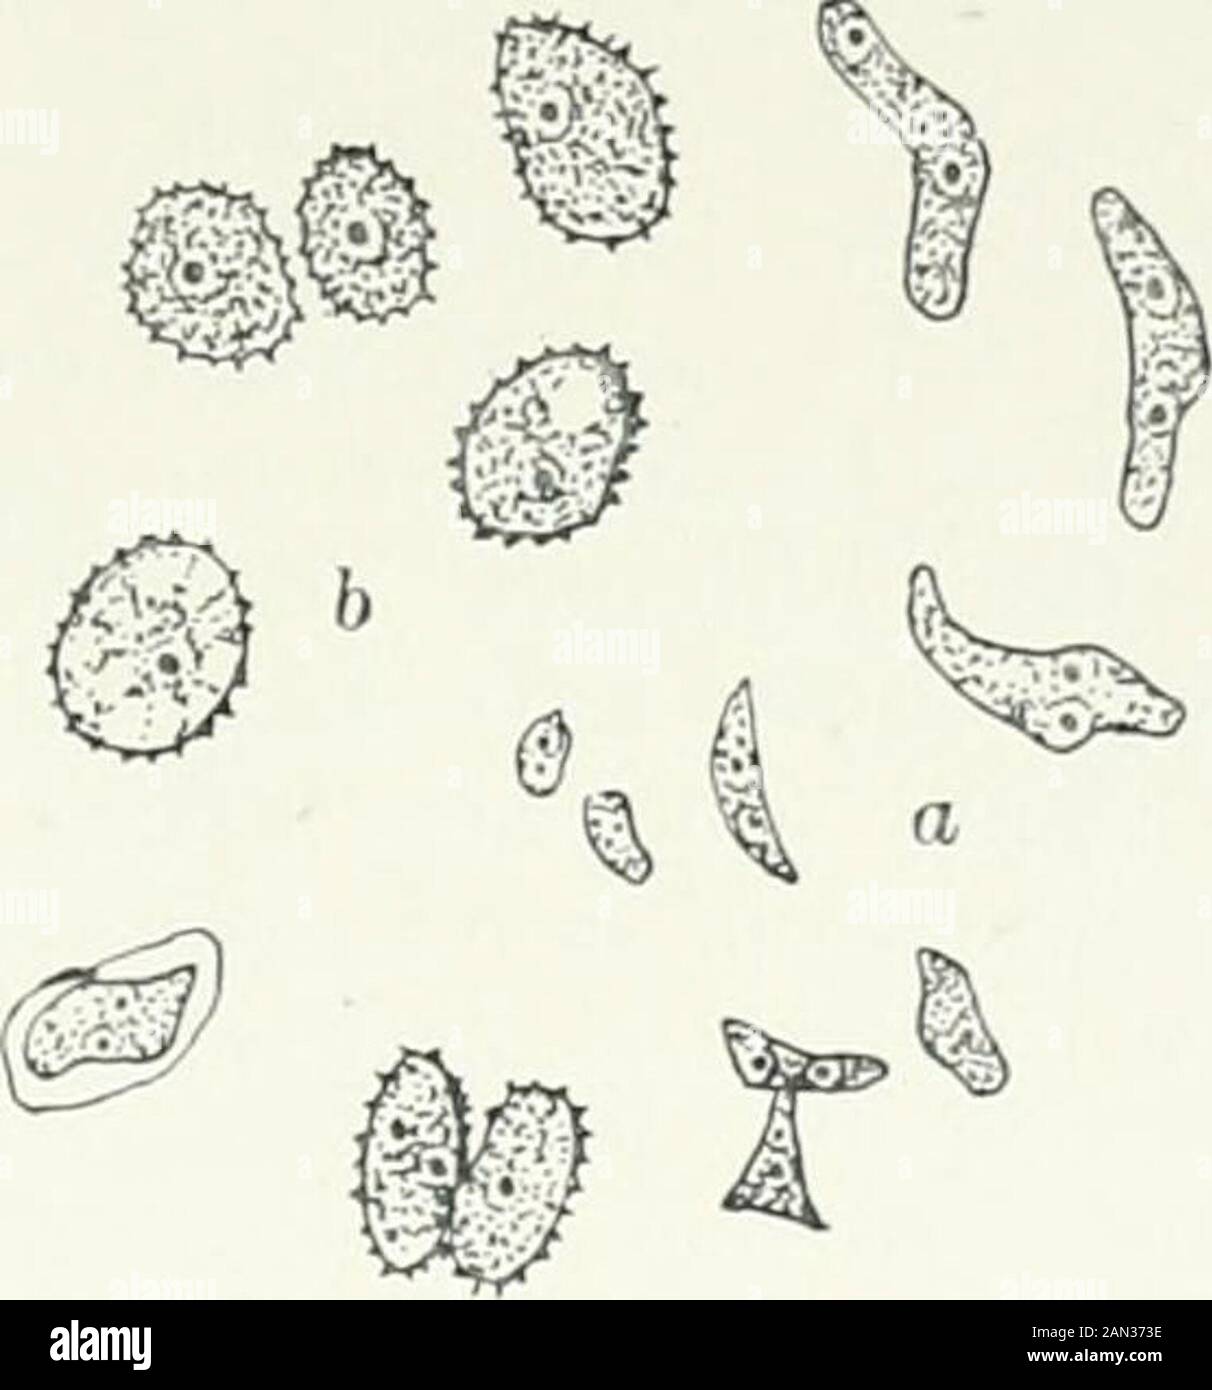 Fungi, Ascomycetes, Ustilaginales, Uredinales . Fig. [51. Fischfri; -.pore- ball, one spore germinating, ? ;oo;after Plowright. Fig. 1-2. Ustilago Cario; u. young, binucleatebrand-spores; b. l&lt;lrr spores after nuclearfusion; after Rawitscher. The young spore, like the cells of the mycelium from which it is derived,contains two nuclei (fig. 152a). These undergo fusion, so that the maturespore is uninucleate (fig. 152/;). The pairing of the nuclei, which beginswith the association of the basidiospores (or their conidia), is thus completedin the brand-spore. The minute investigation of the gro Stock Photo